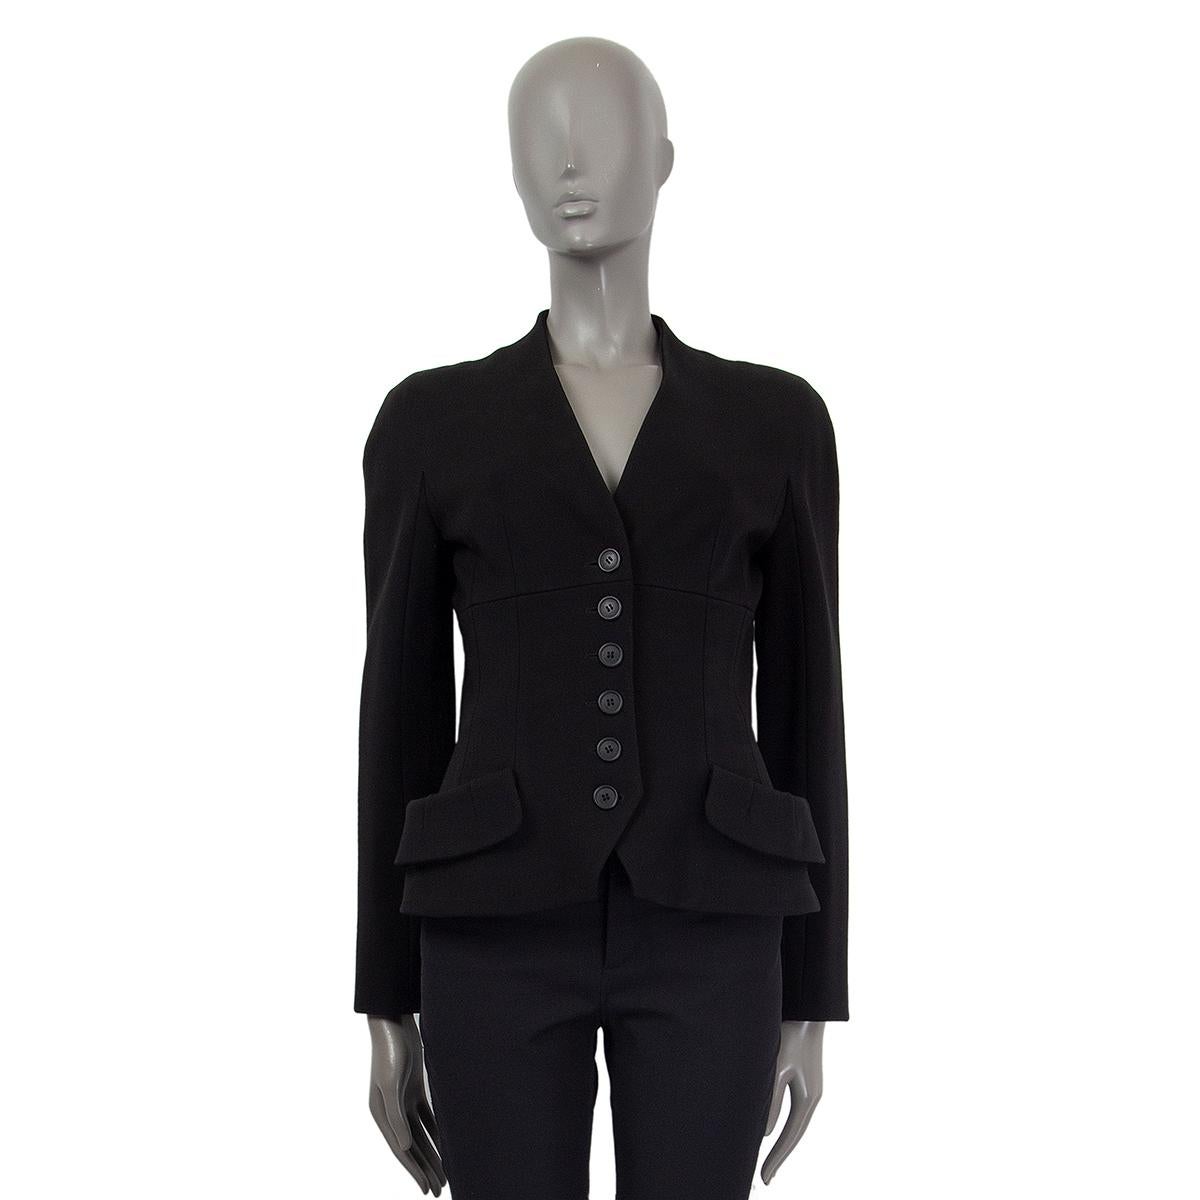 Christian Dior collarless blazer in black viscose (with 4%) elastane. Two front pockets. Lined in black silk (with 6% lycra). Has been worn with minor signs of use along the neckline. Overall in excellent condition.

Tag Size 38
Size S
Bust 88cm